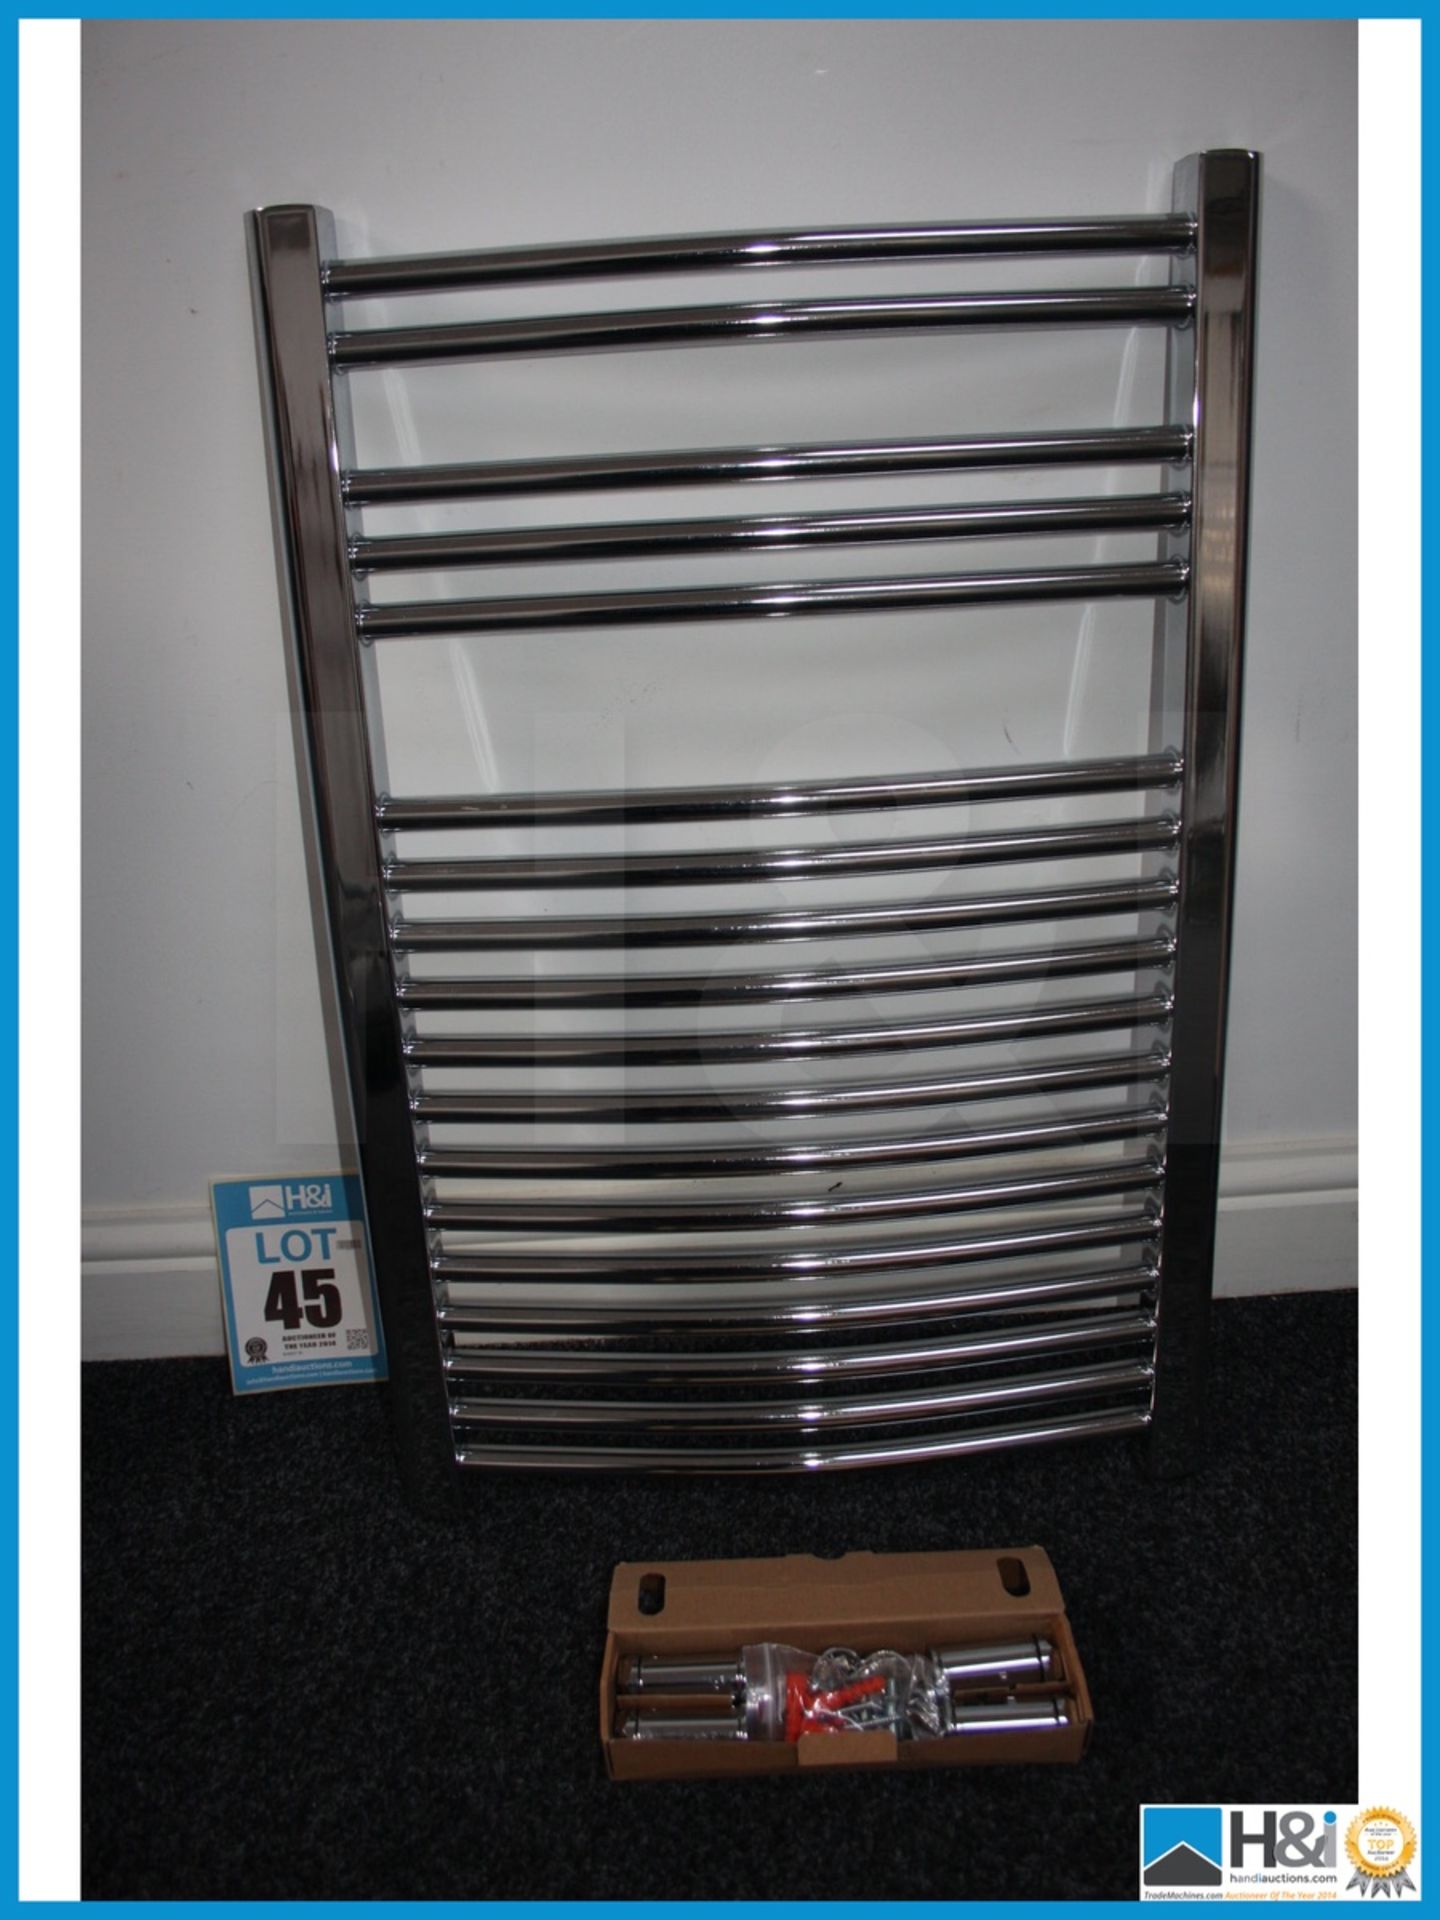 Chrome curved heated towel rail with fitting kit unused and boxed 760 x 500 mm. Appraisal: Viewing